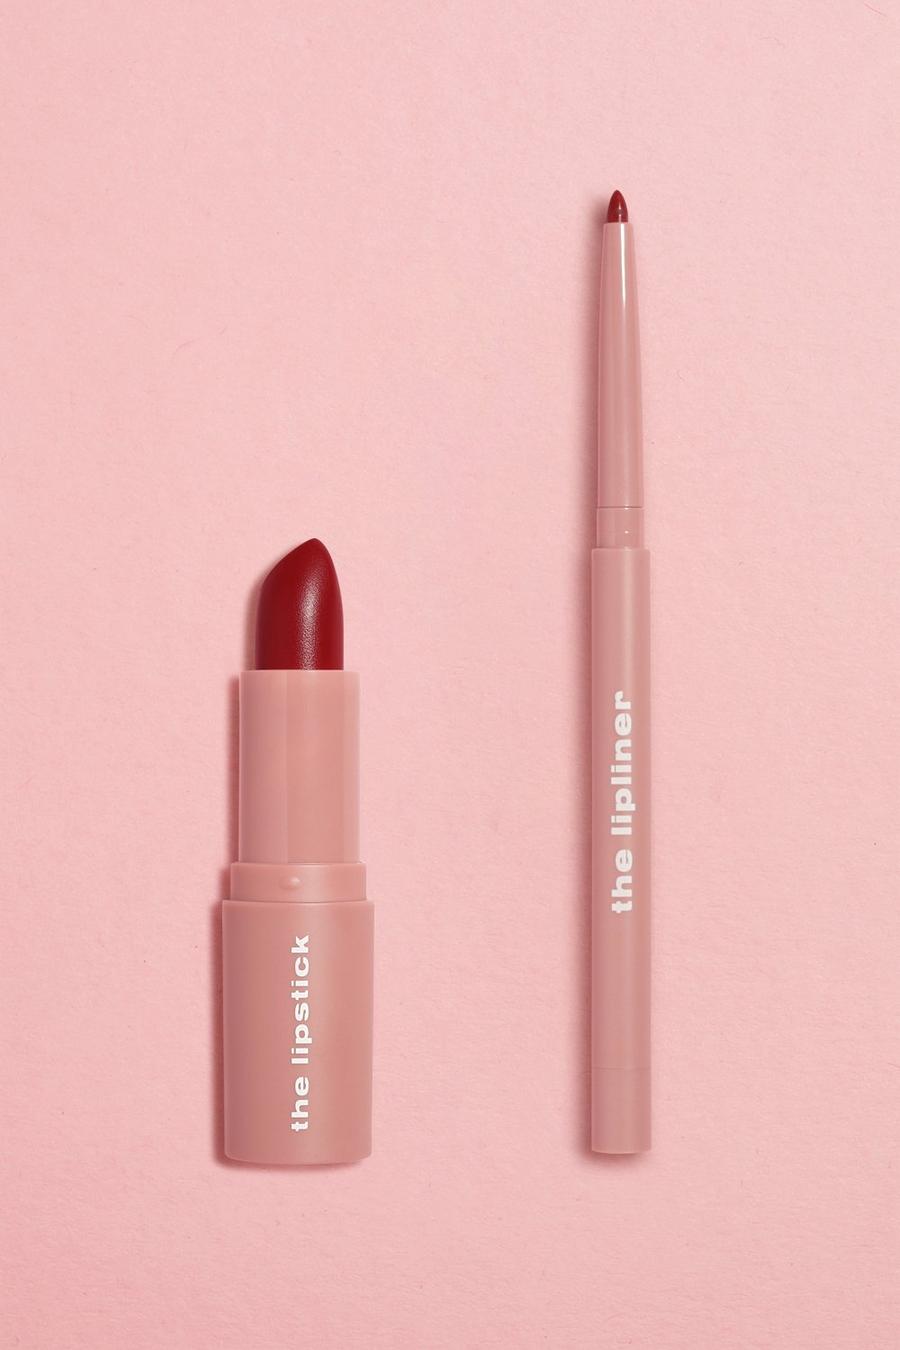 Boohoo Beauty -  Le pack lèvres classique - Rouge, Red rot